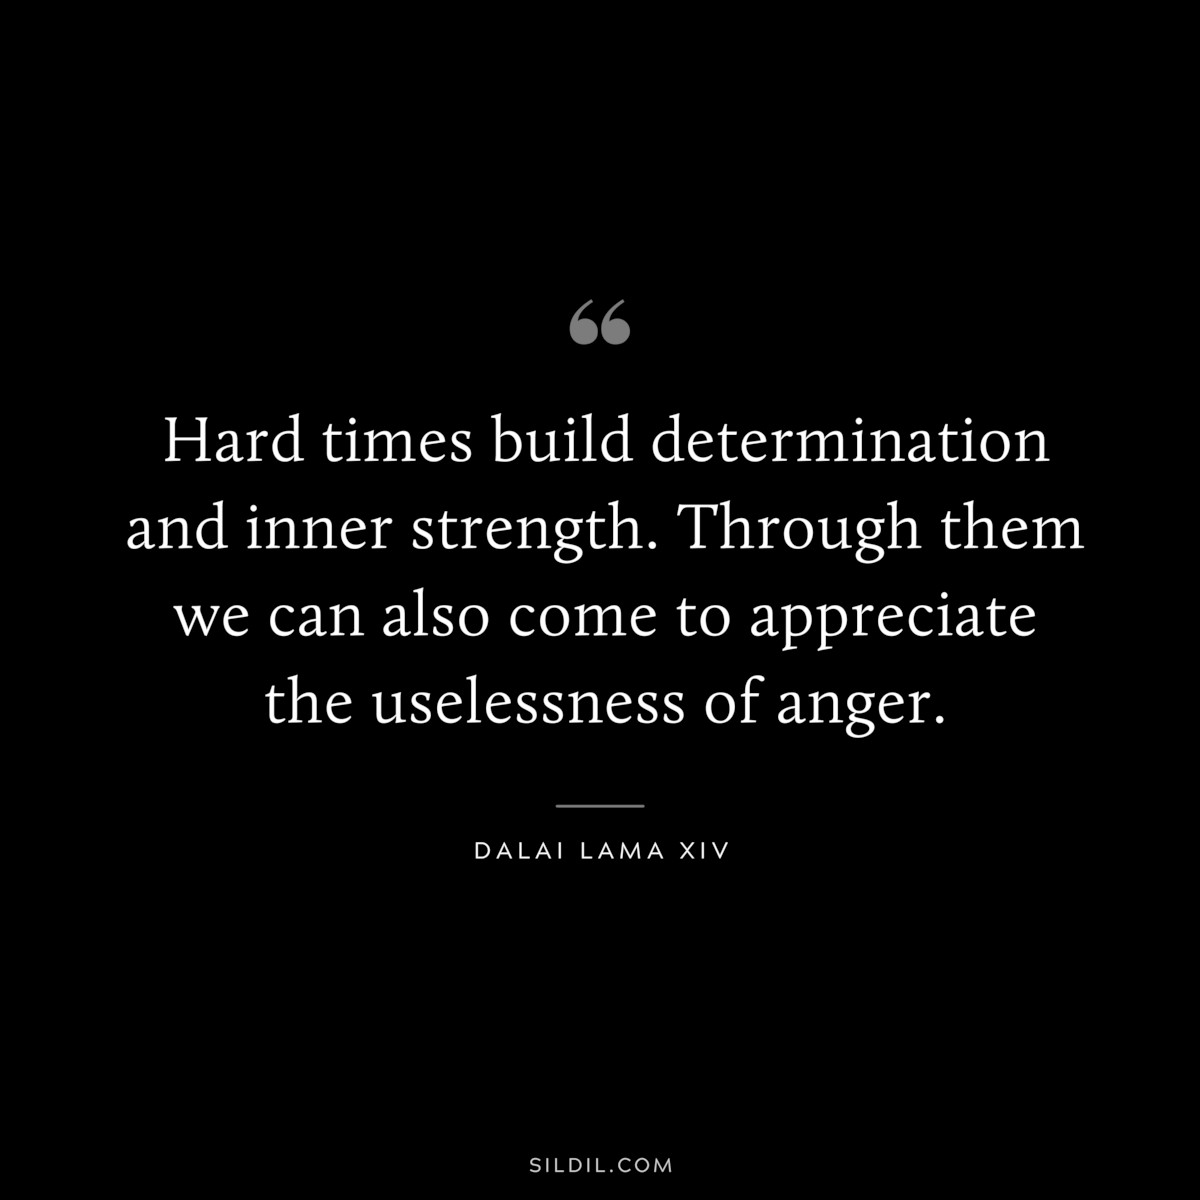 Hard times build determination and inner strength. Through them we can also come to appreciate the uselessness of anger. ― Dalai Lama XIV